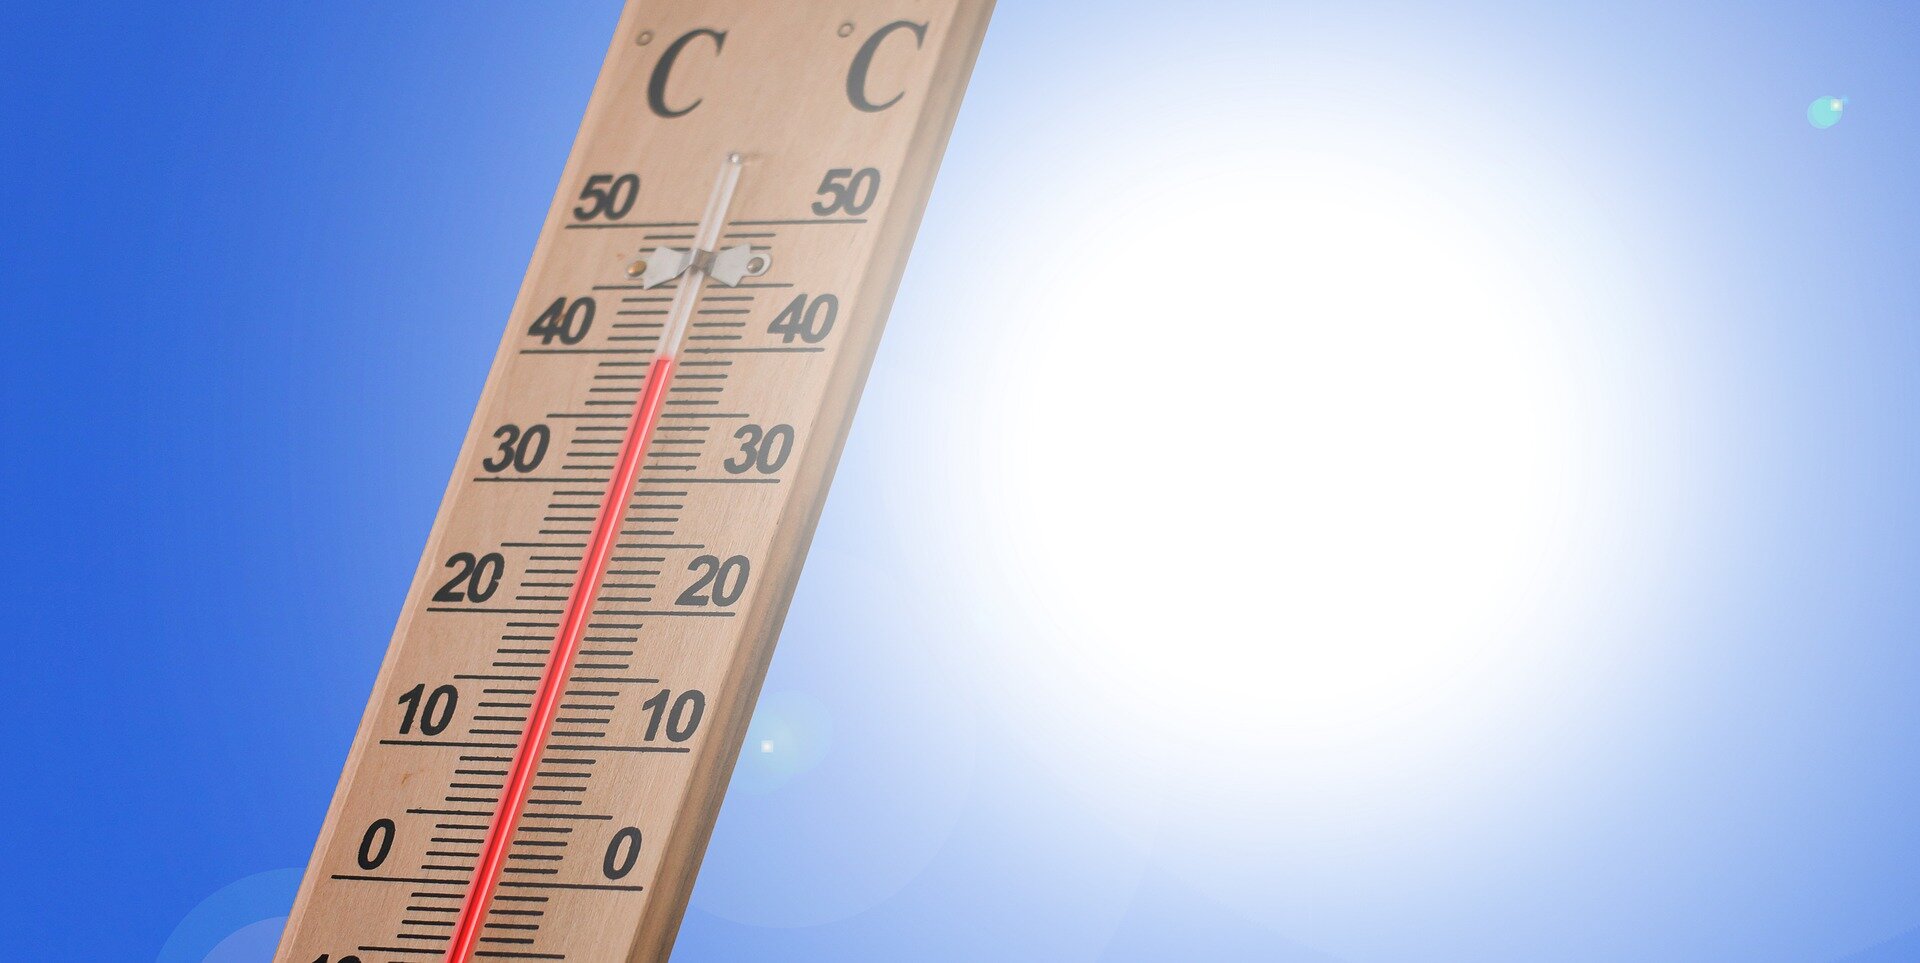 Business can no longer ignore extreme heat events. It's becoming a danger to the bottom line